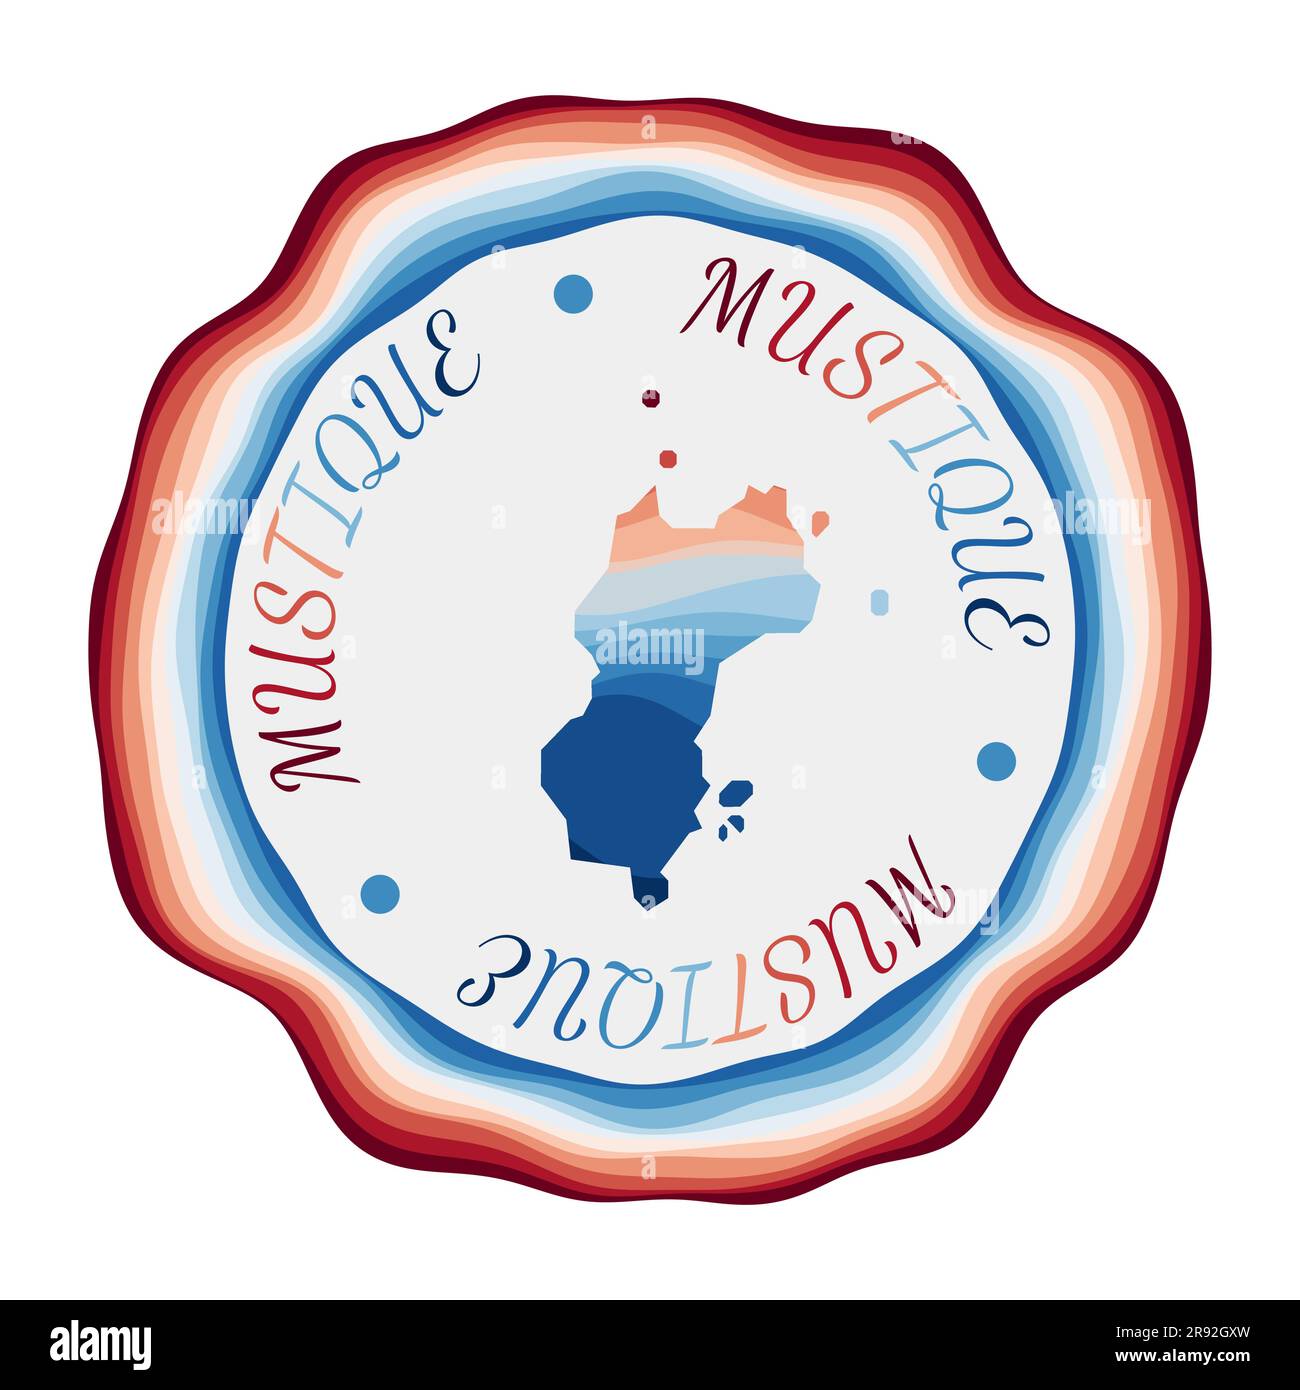 Mustique badge. Map of the island with beautiful geometric waves and ...